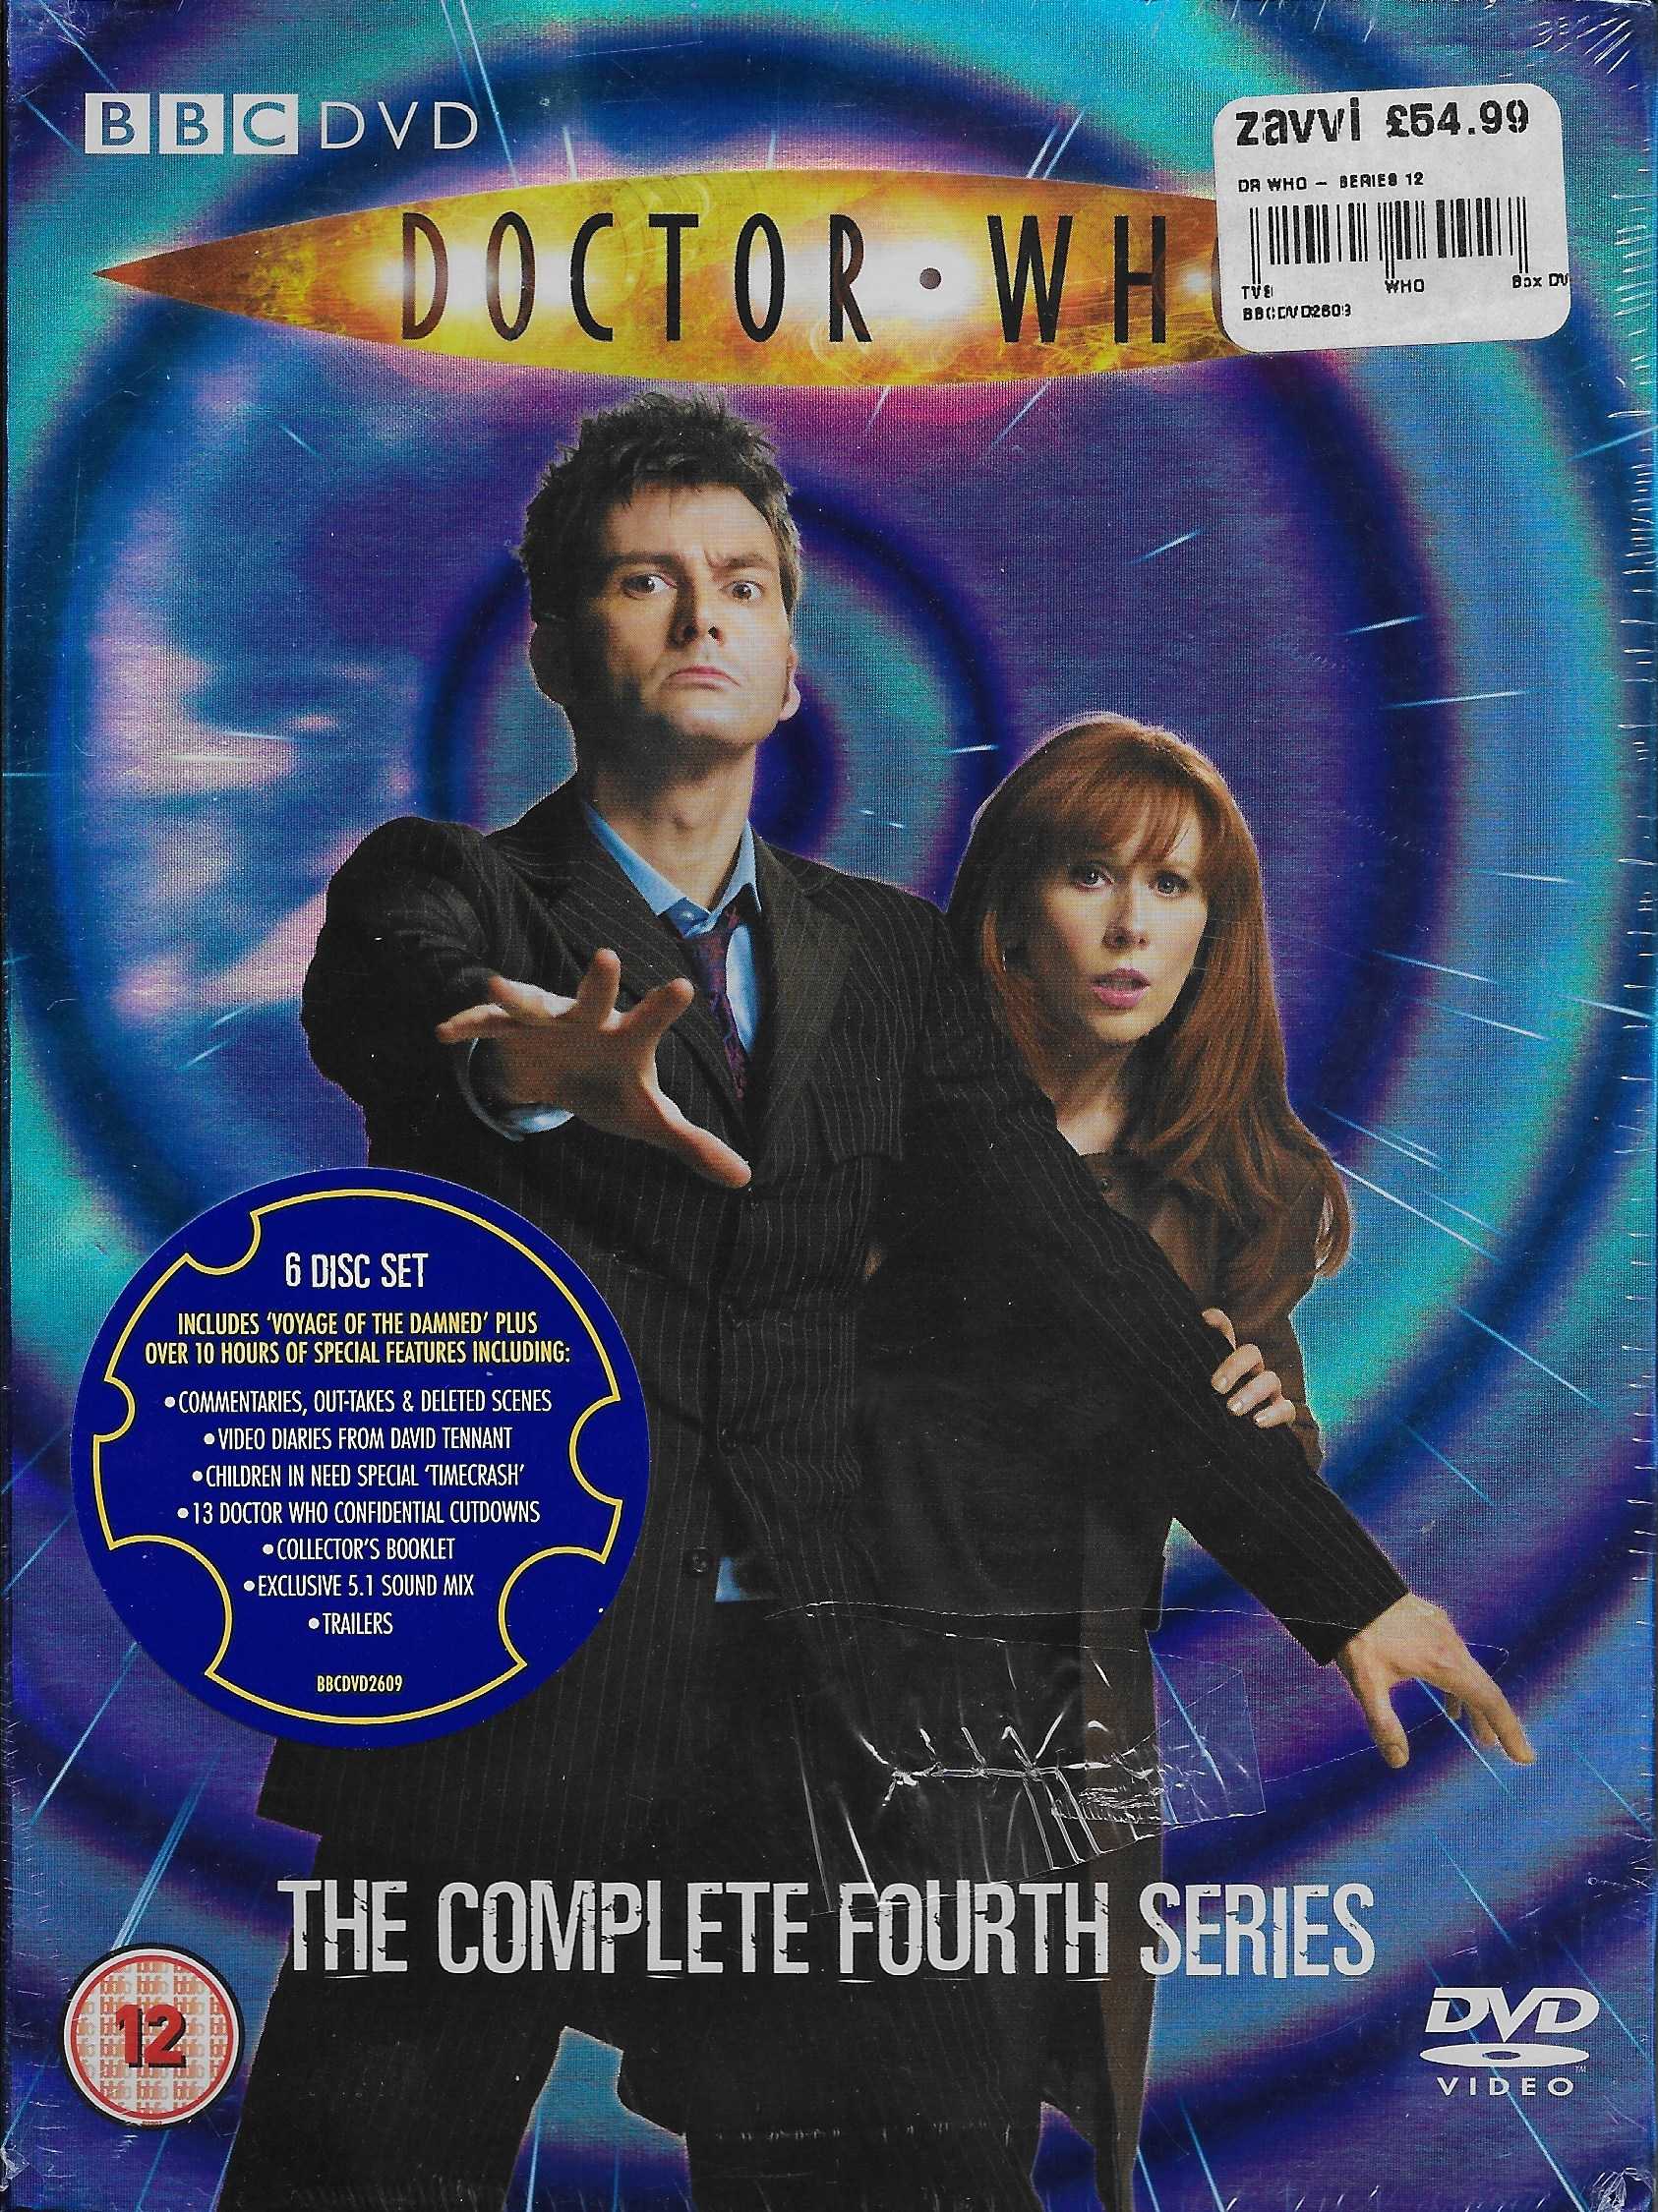 Picture of BBCDVD 2609 Doctor Who - Series 4 boxed set by artist Various from the BBC dvds - Records and Tapes library